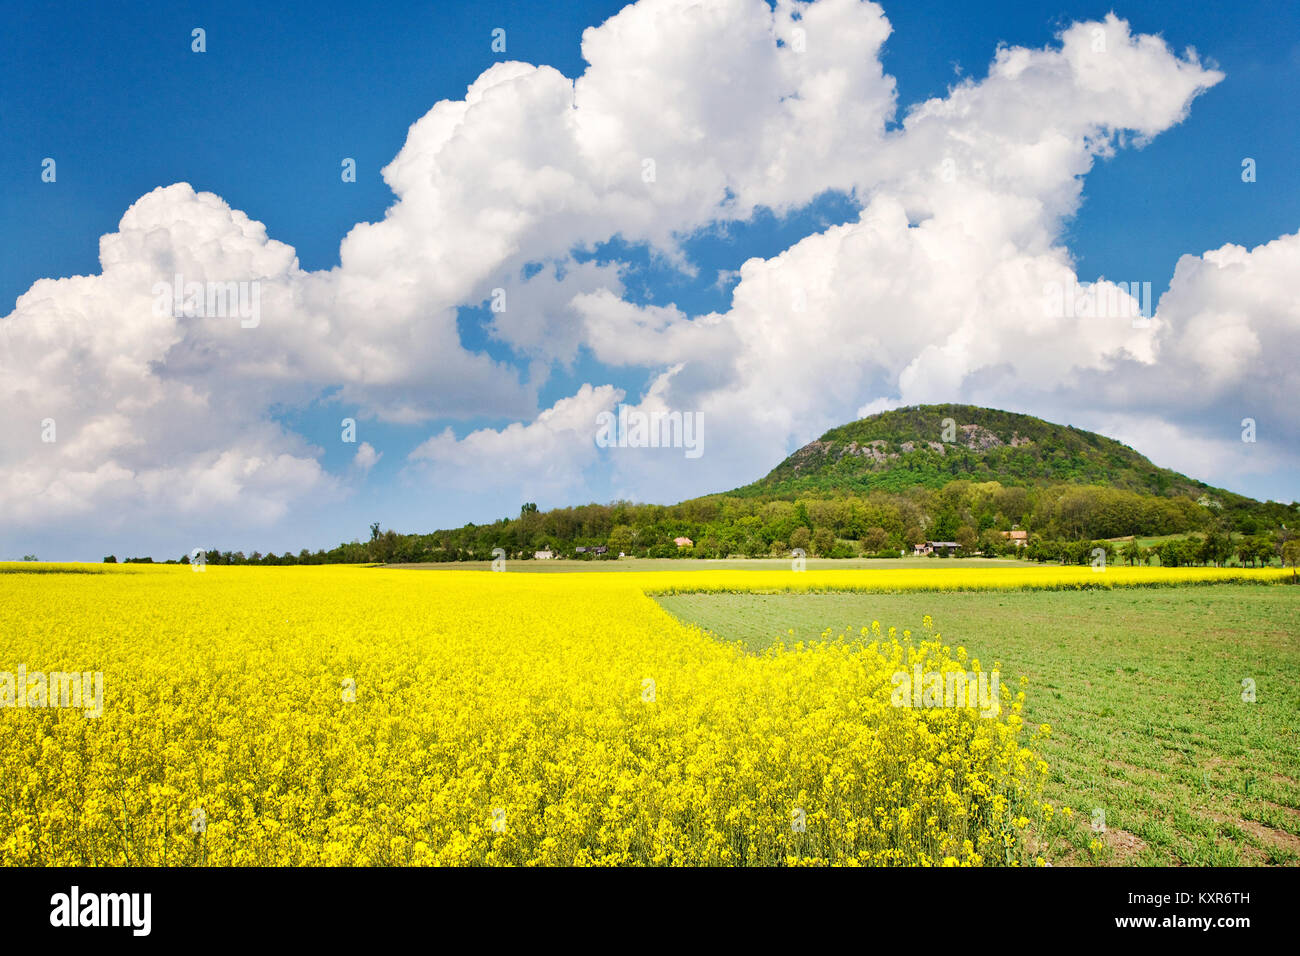 national mystic hill Rip, Central Bohemia, Czech republic - spring landscape with green fields and blue sky with clouds Stock Photo